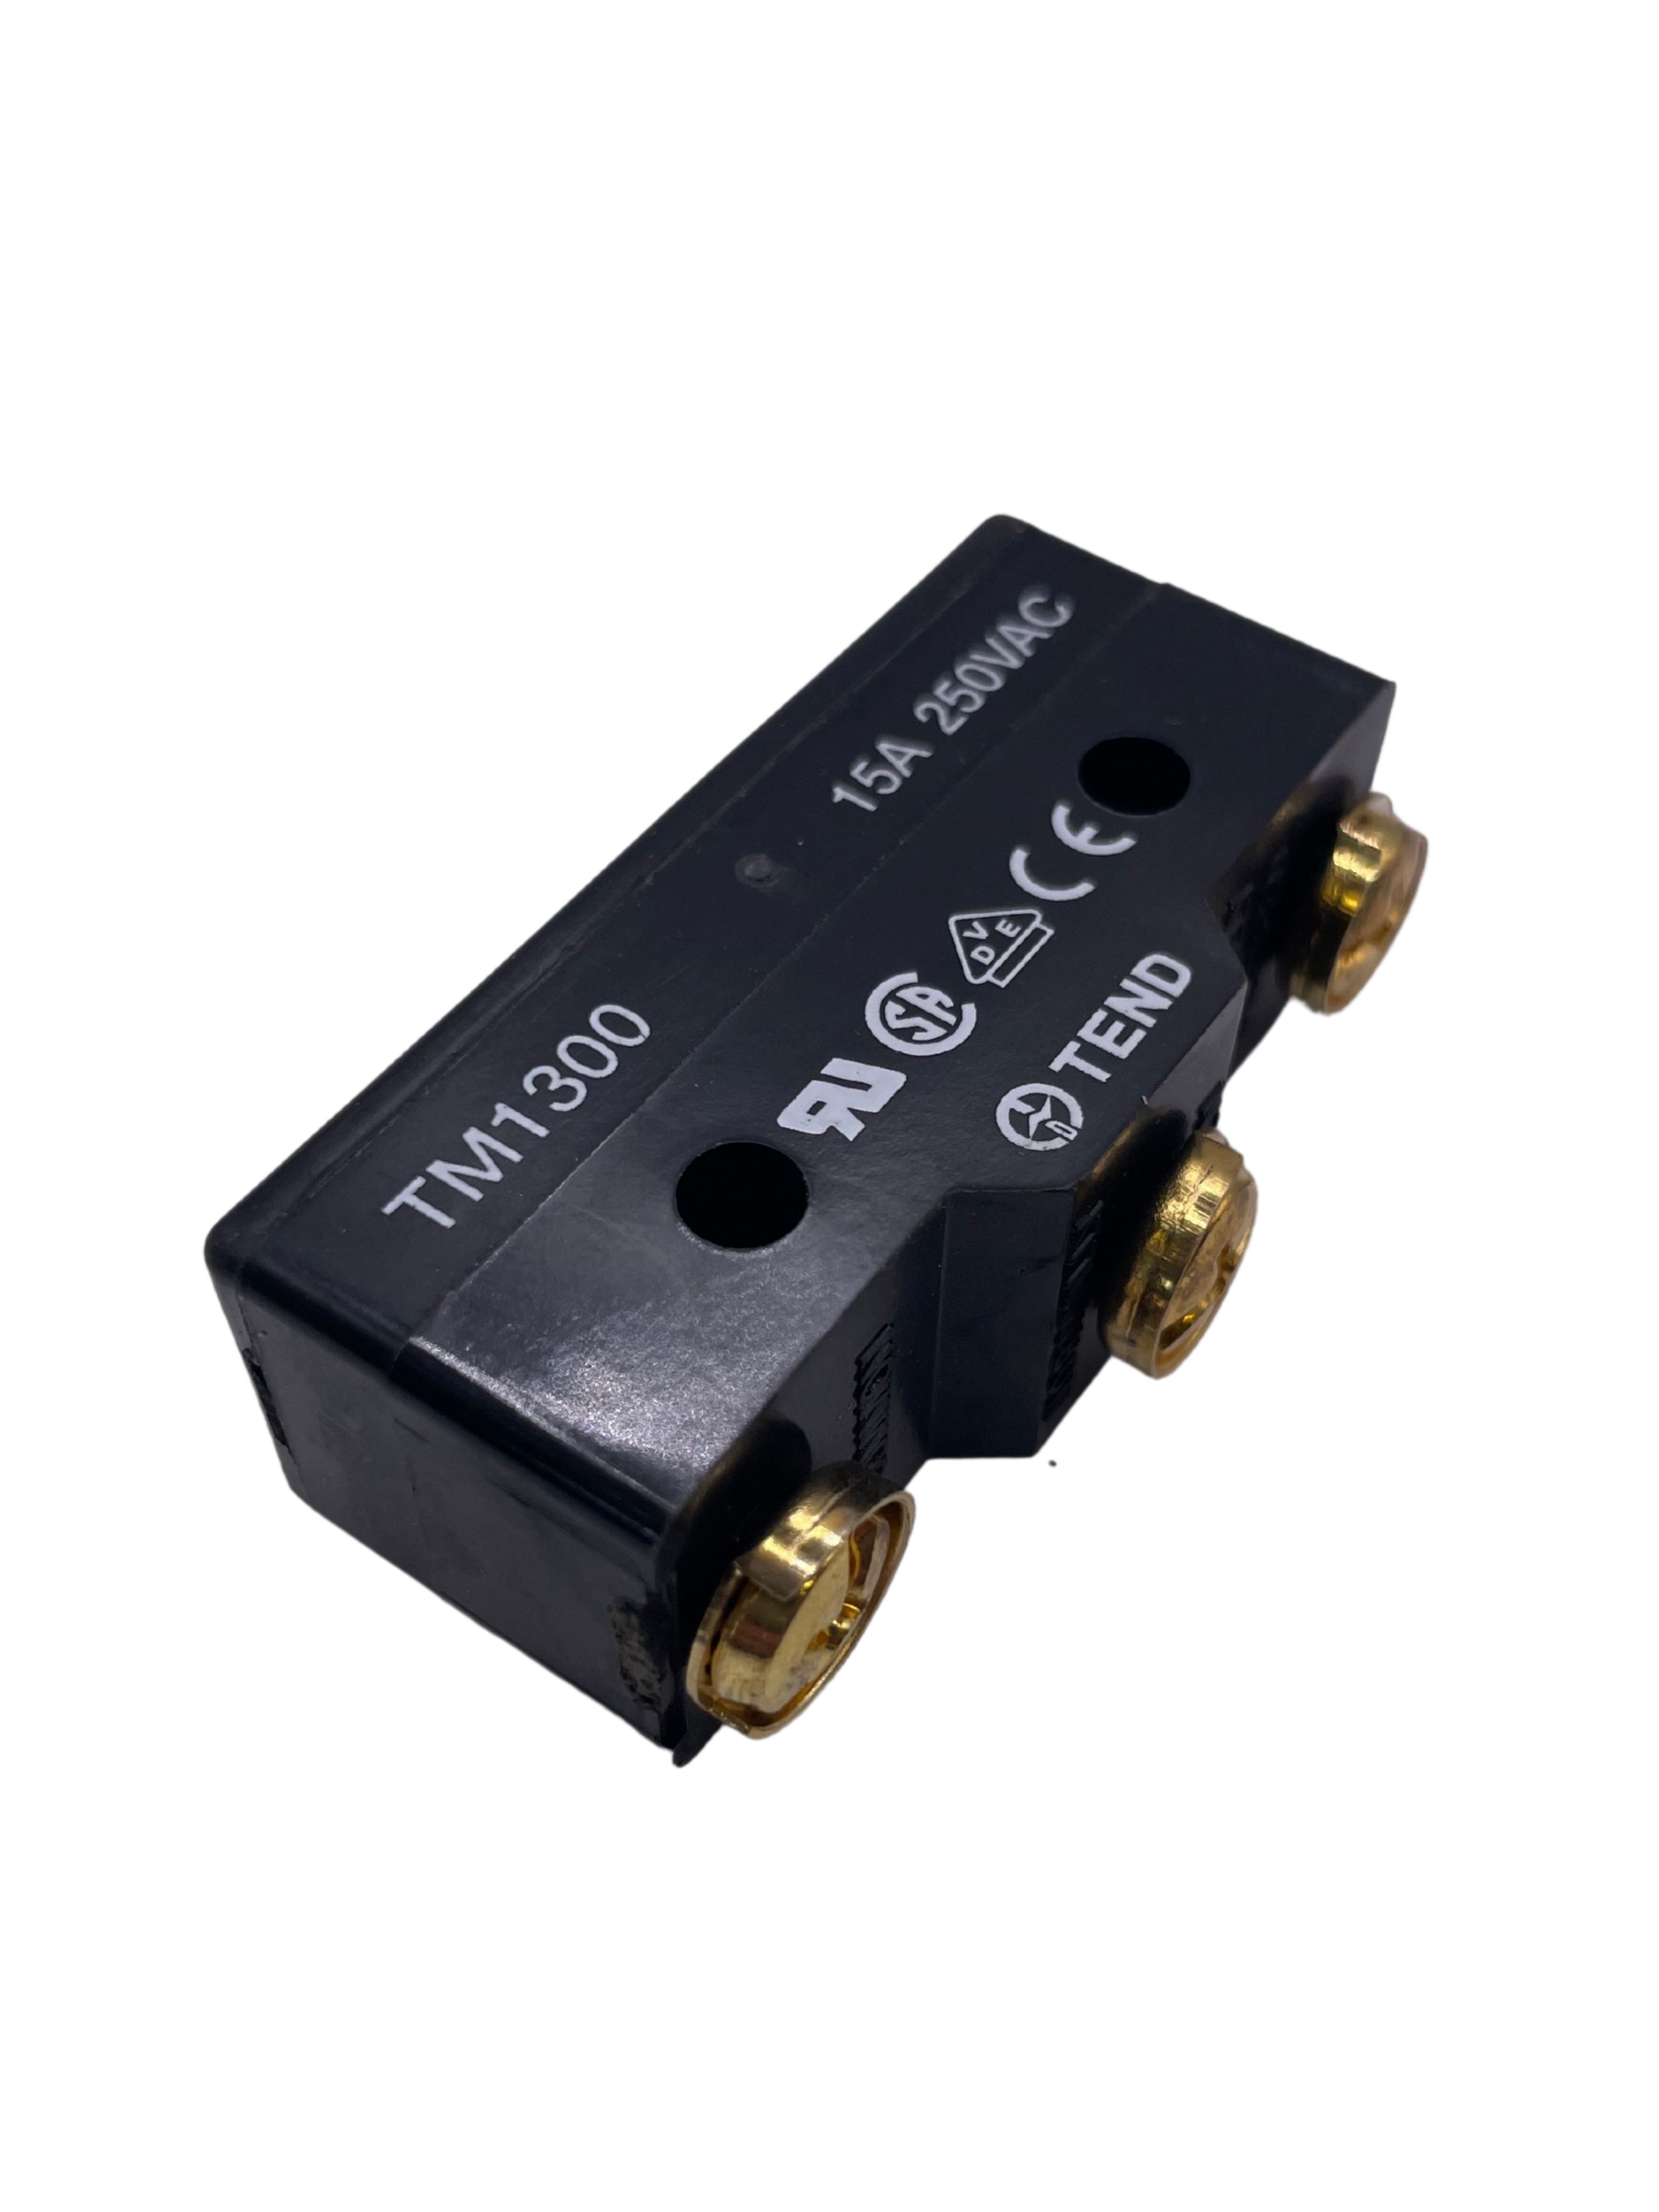 TM-1300 Pin Plunger Actuator Momentary Micro Limit Switch 